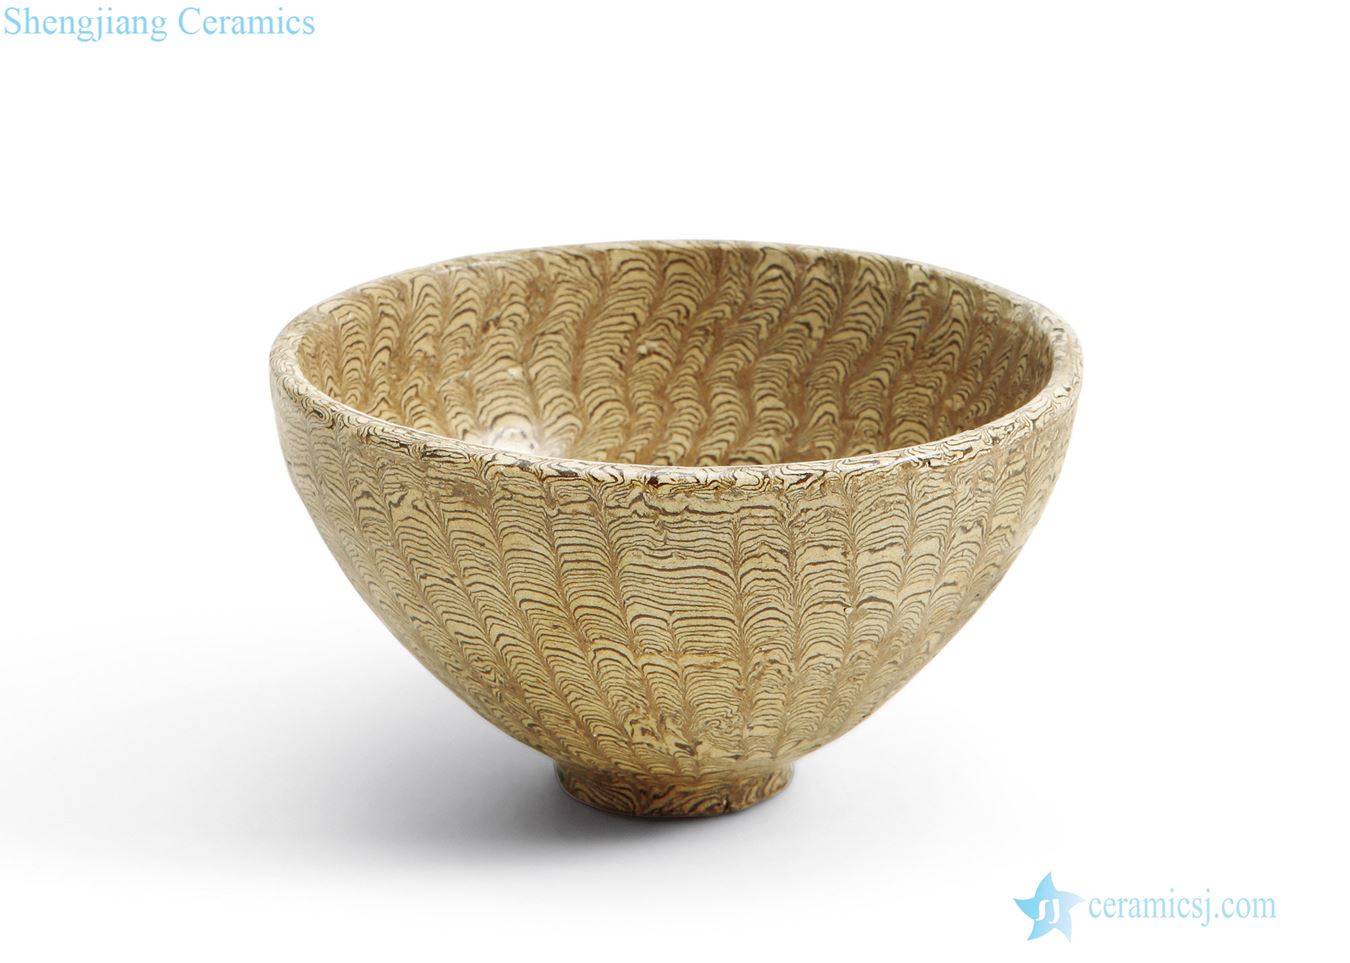 Northern song dynasty (960 ~ 1127) and gold (1115 ~ 1234) ground tire bowl